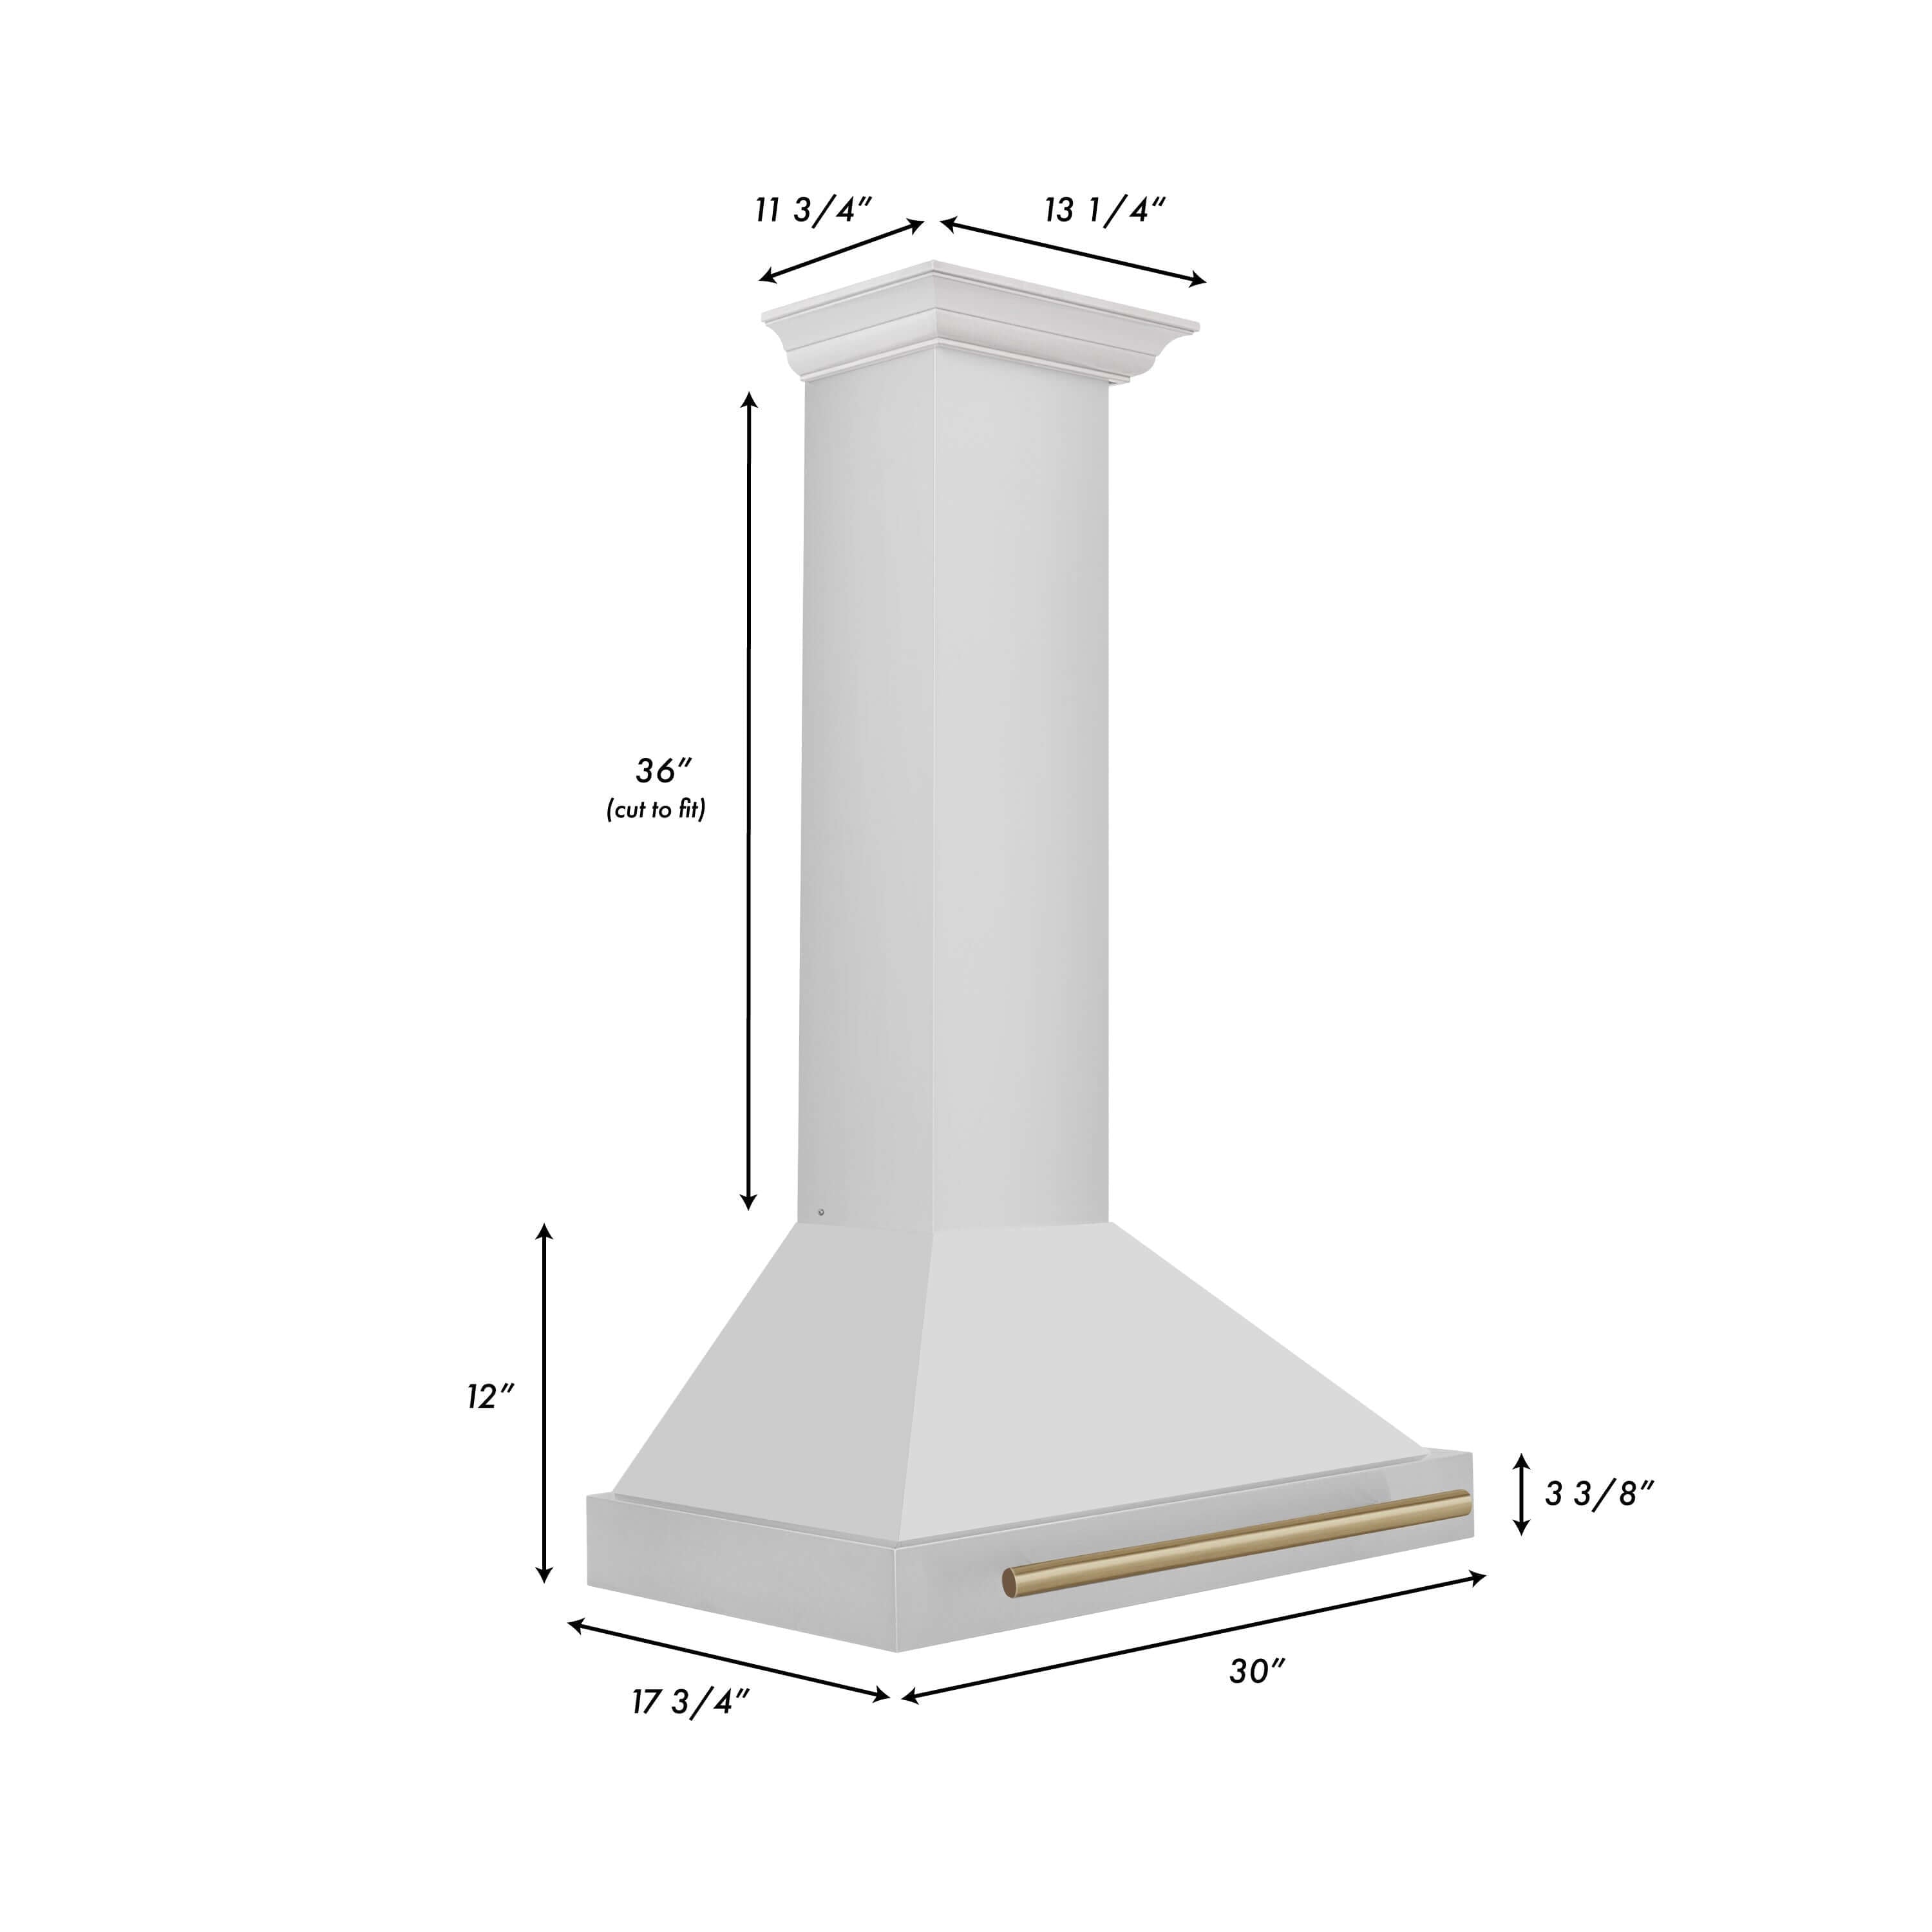 ZLINE Autograph Edition 30 in. Stainless Steel Range Hood with Stainless Steel Shell and Accents (KB4STZ-30) dimensional diagram and measurements.